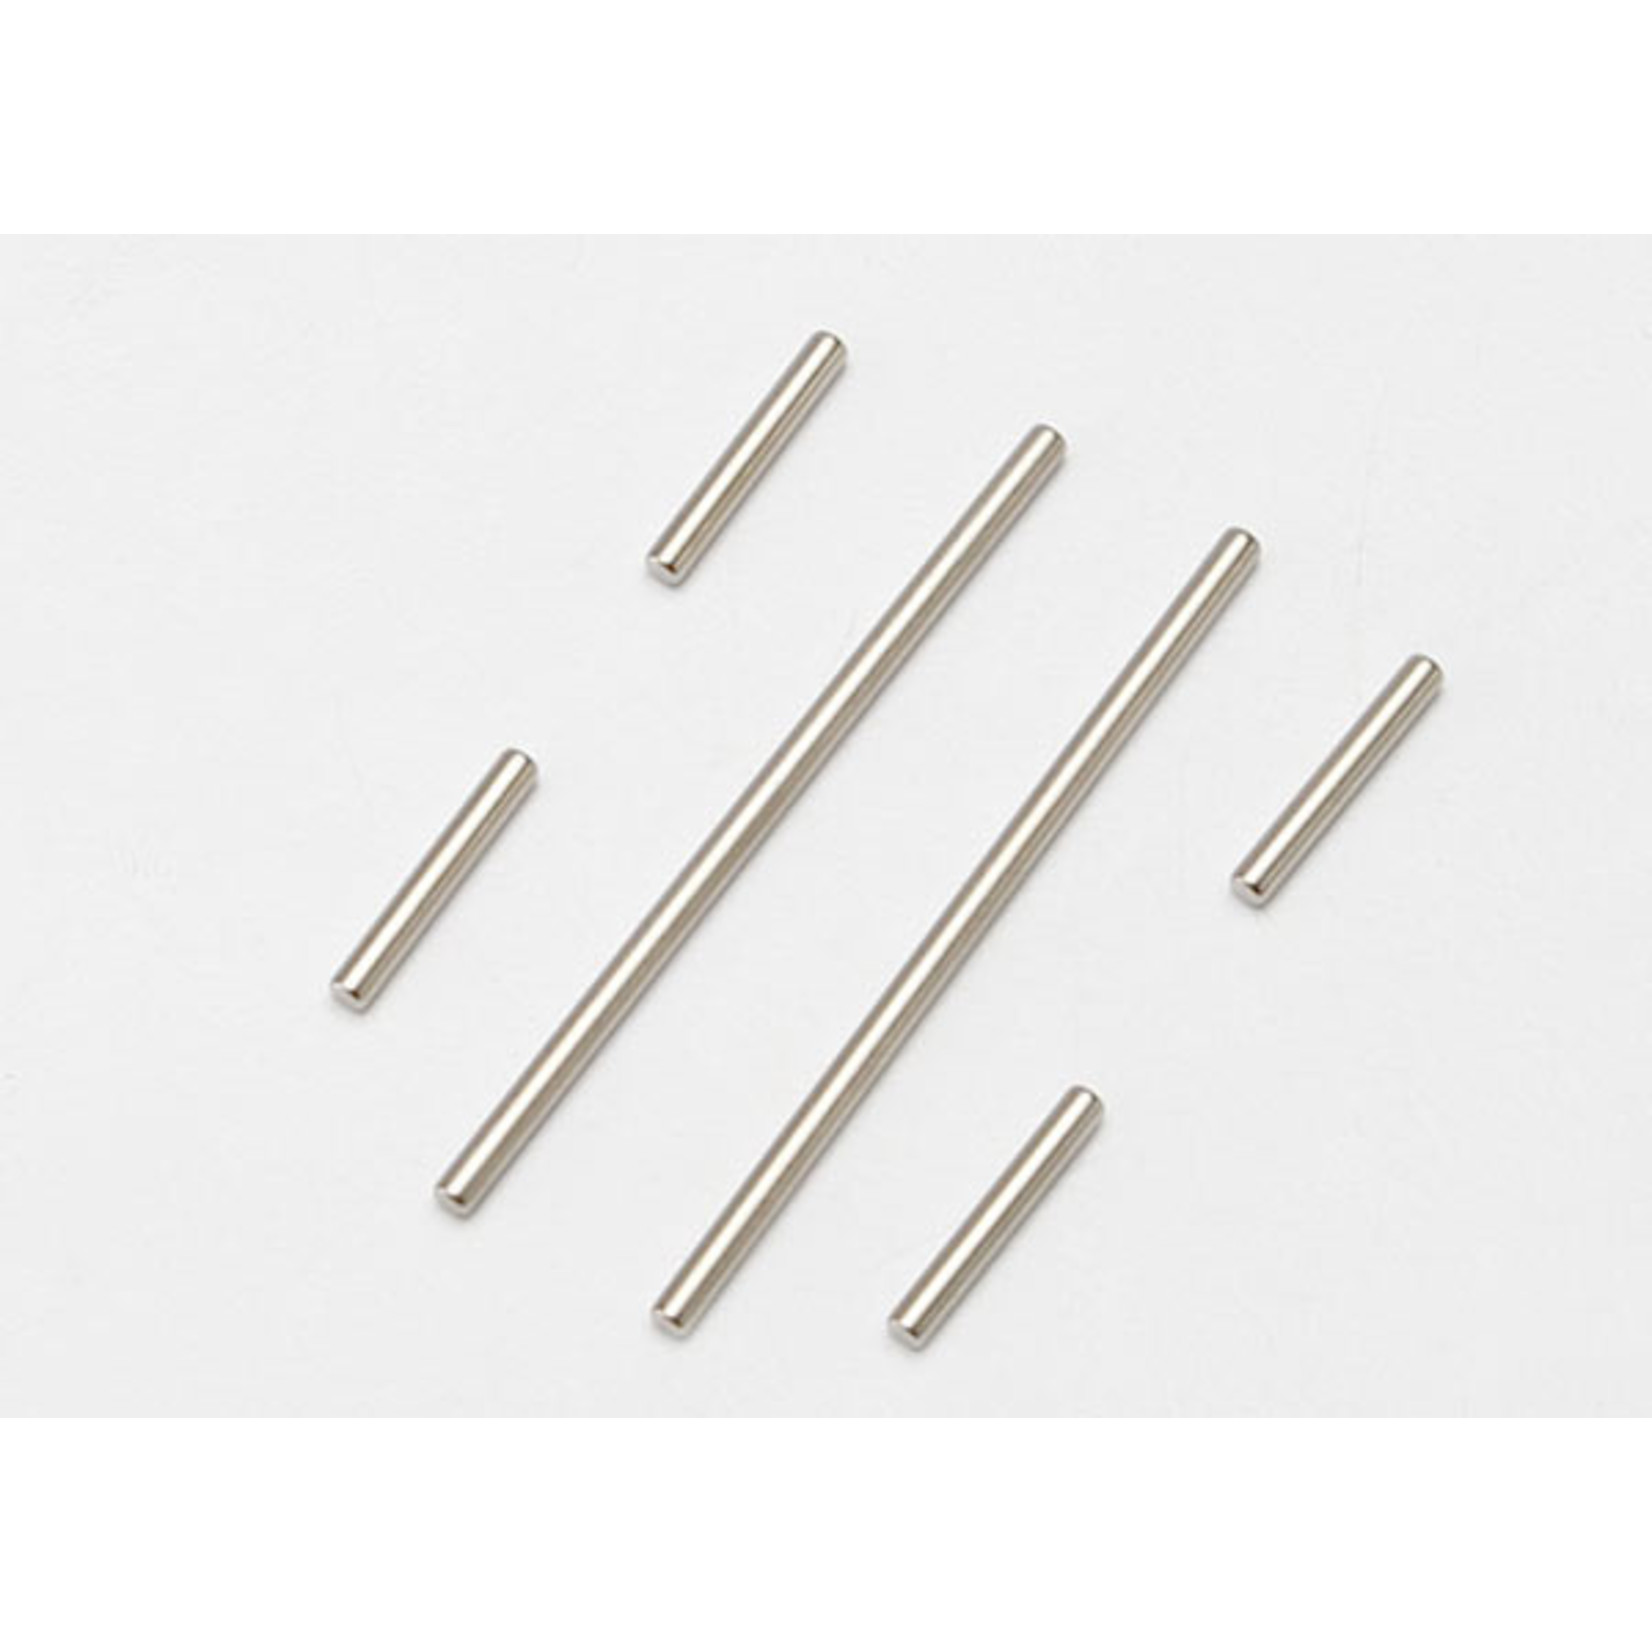 Traxxas 7021 - Suspension pin set (front or rear), 2x46mm